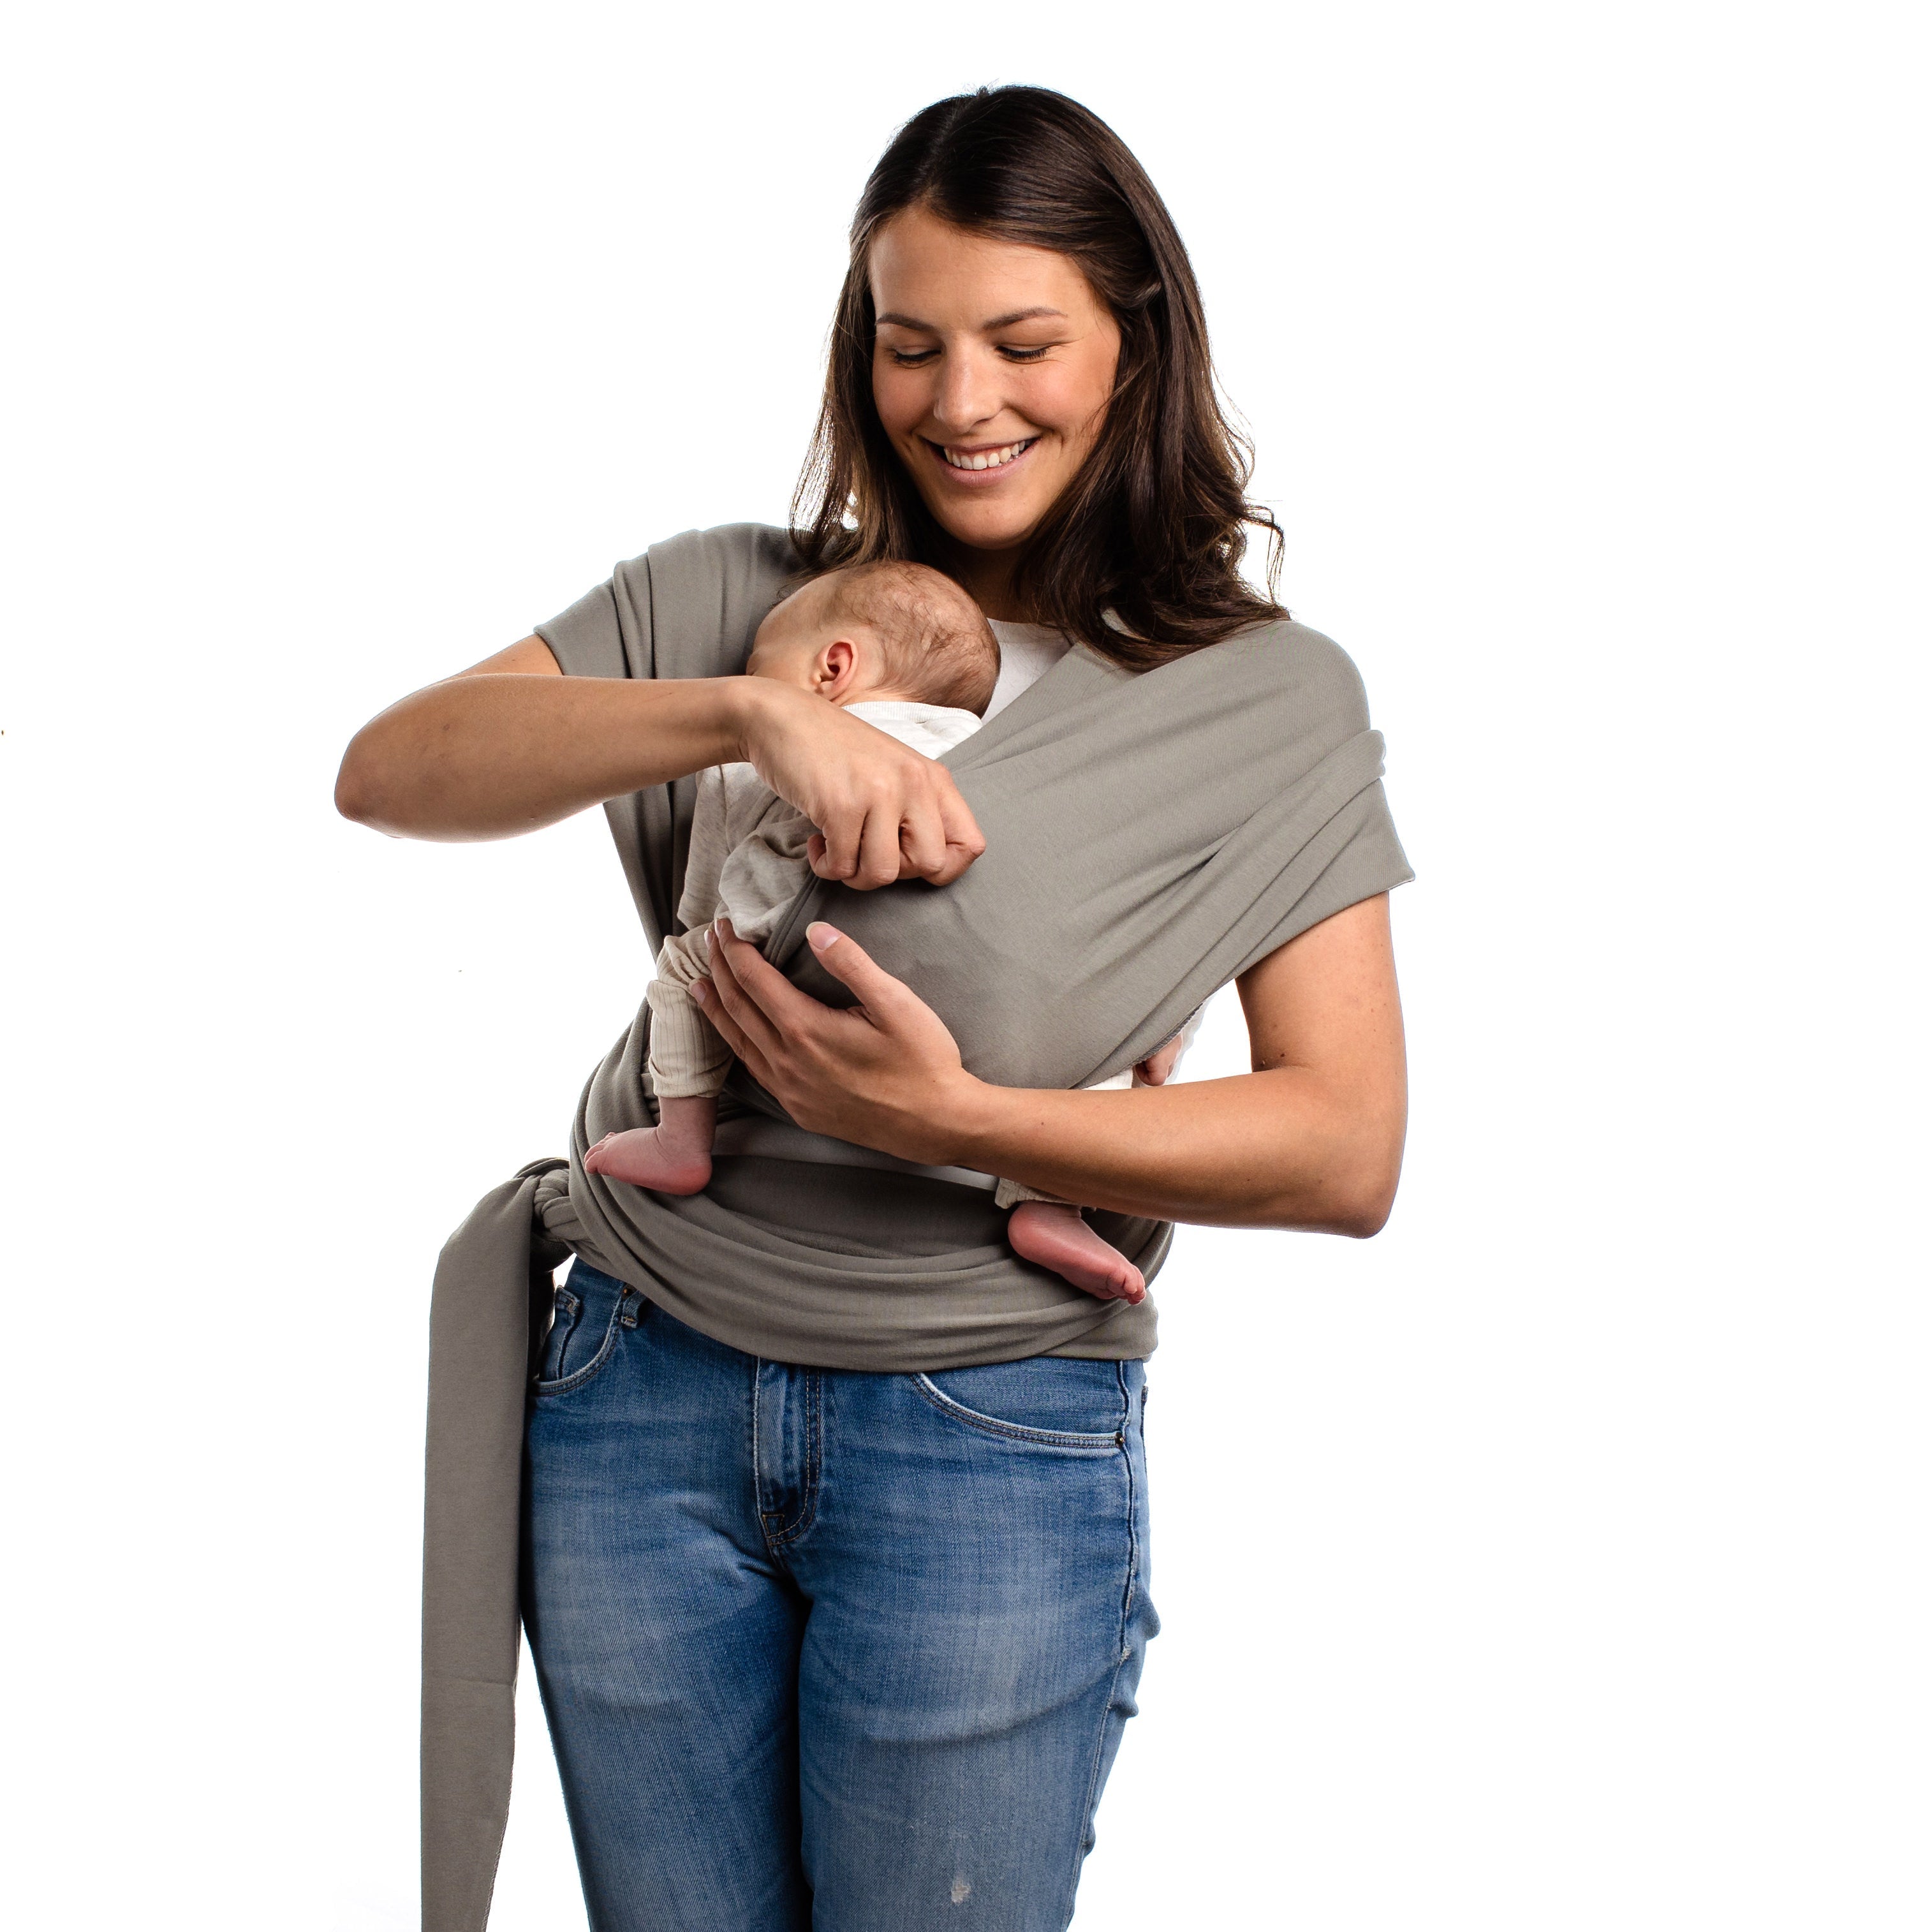 A knowledgeable young mom is putting her baby in a front carry ergonomic position in her gray boba classic wrap. She is wearing jeans and a white shirt standing on a white background.